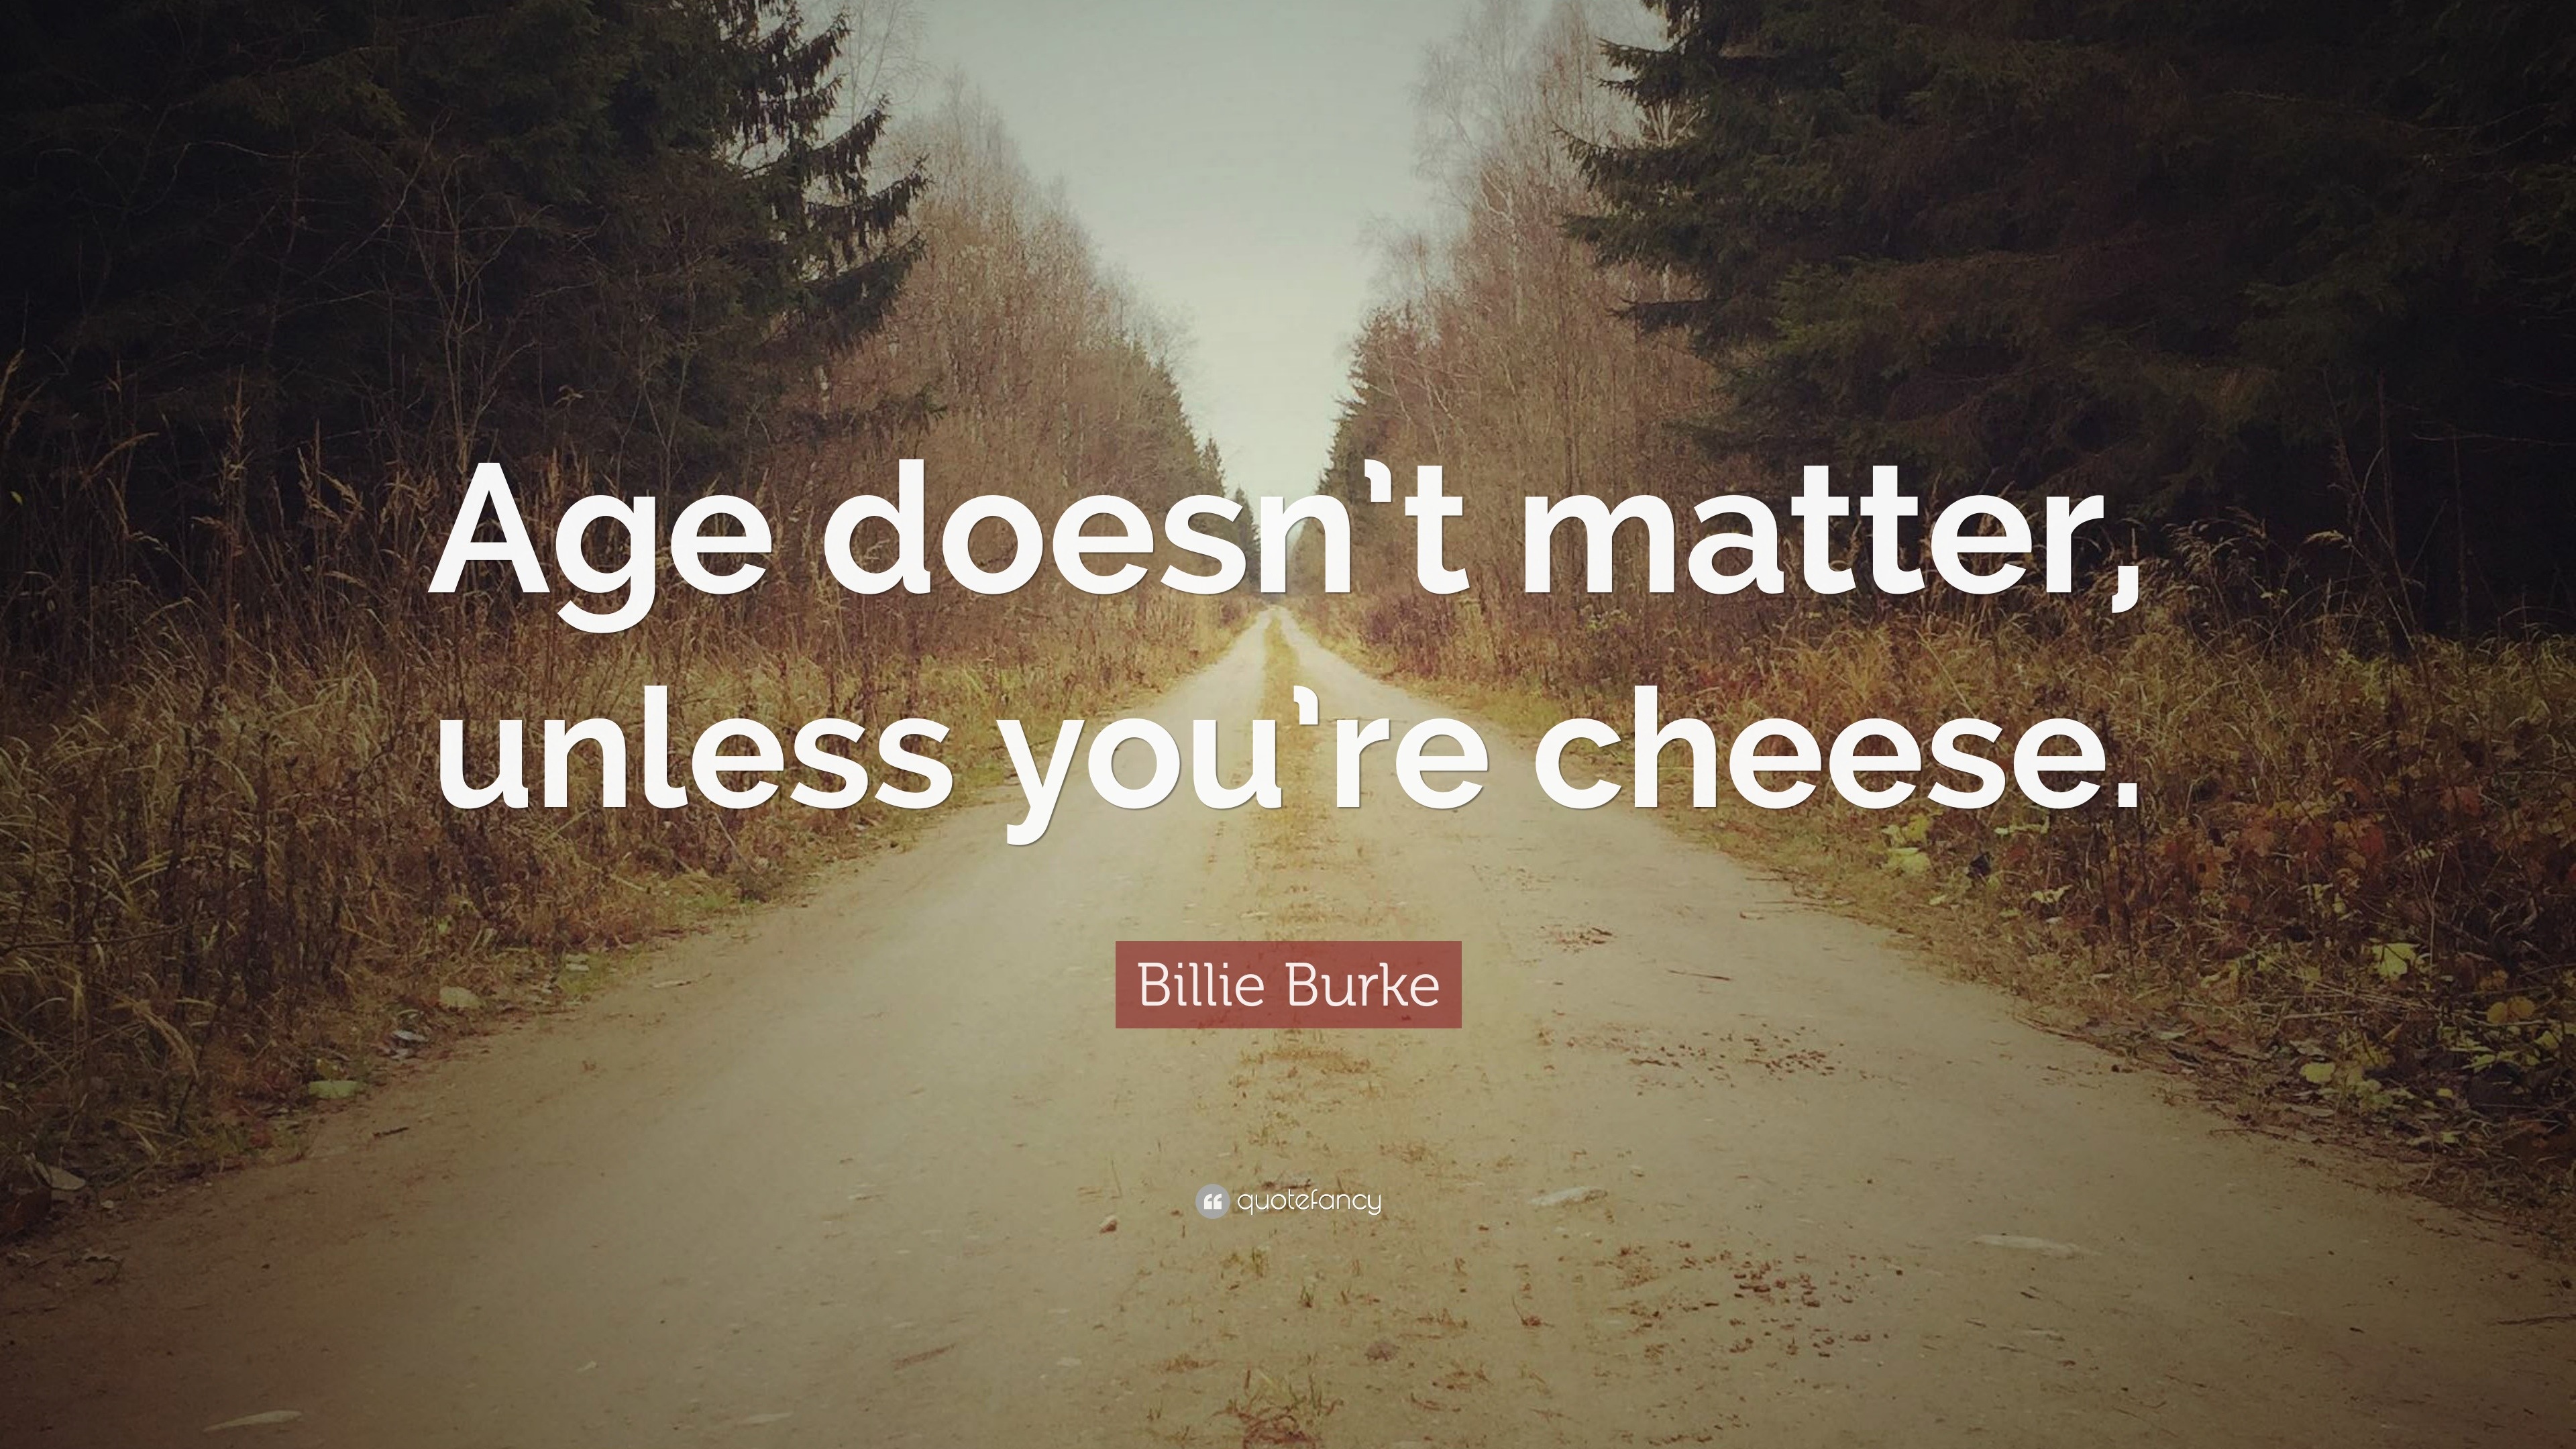 Billie Burke Quote “Age doesn’t matter, unless you’re